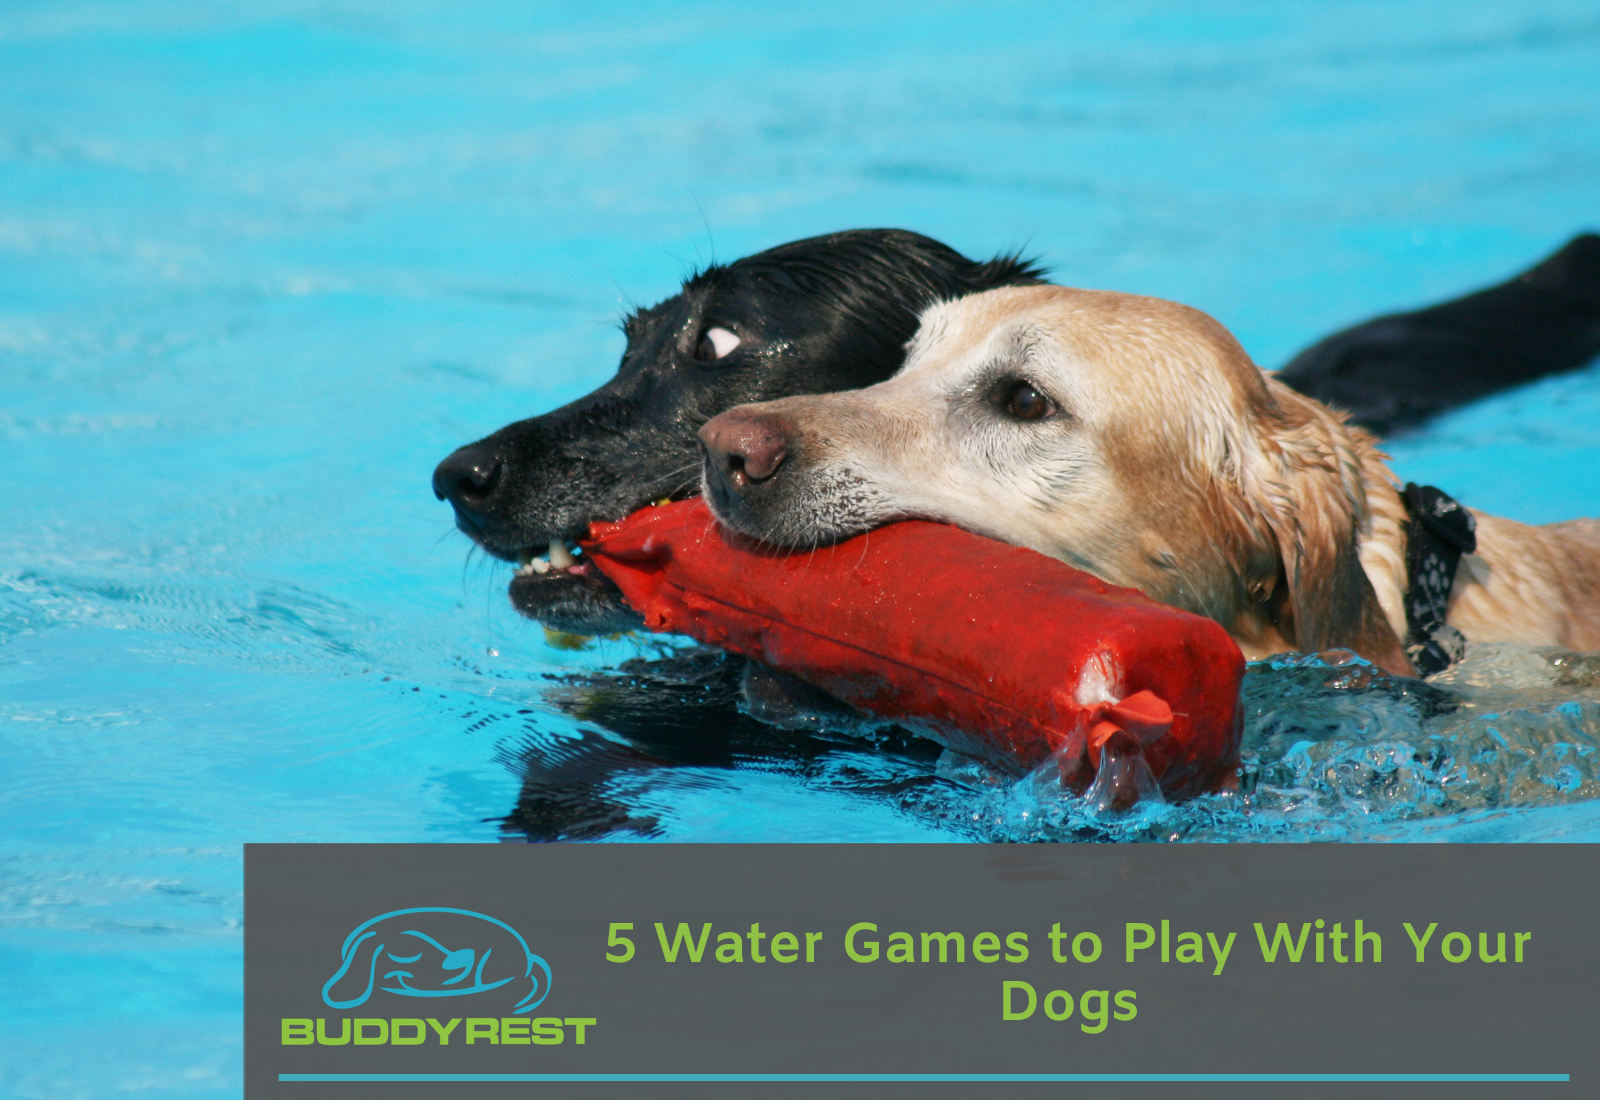 5 Water Games to Play With Your Dogs